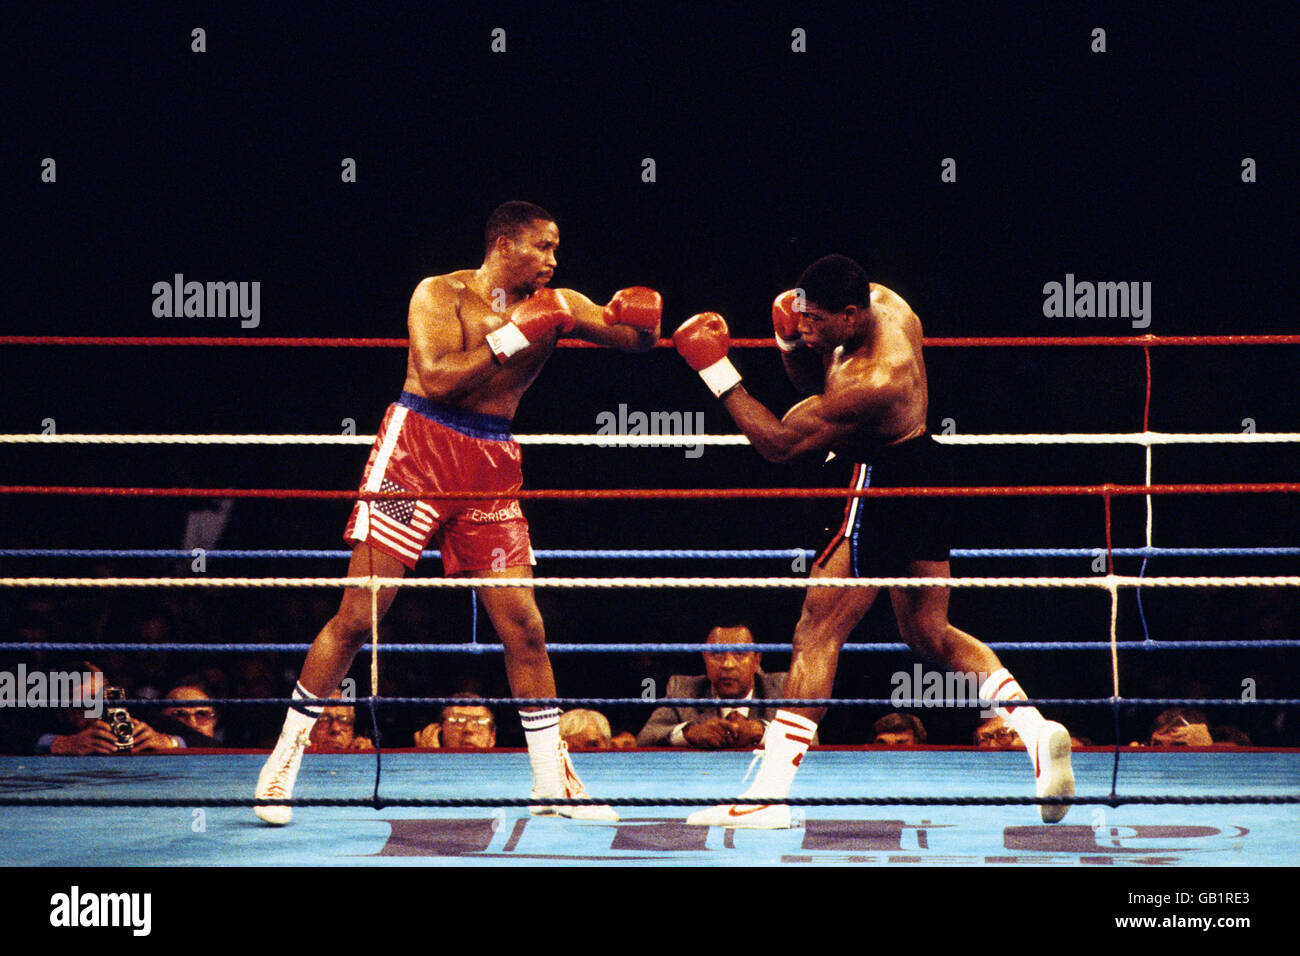 Action from the bout between Tim Witherspoon and Frank Bruno. Witherspoon went on to defeat Bruno in the 11th round to retain his WBA title belt at Wembley Stadium. Stock Photo